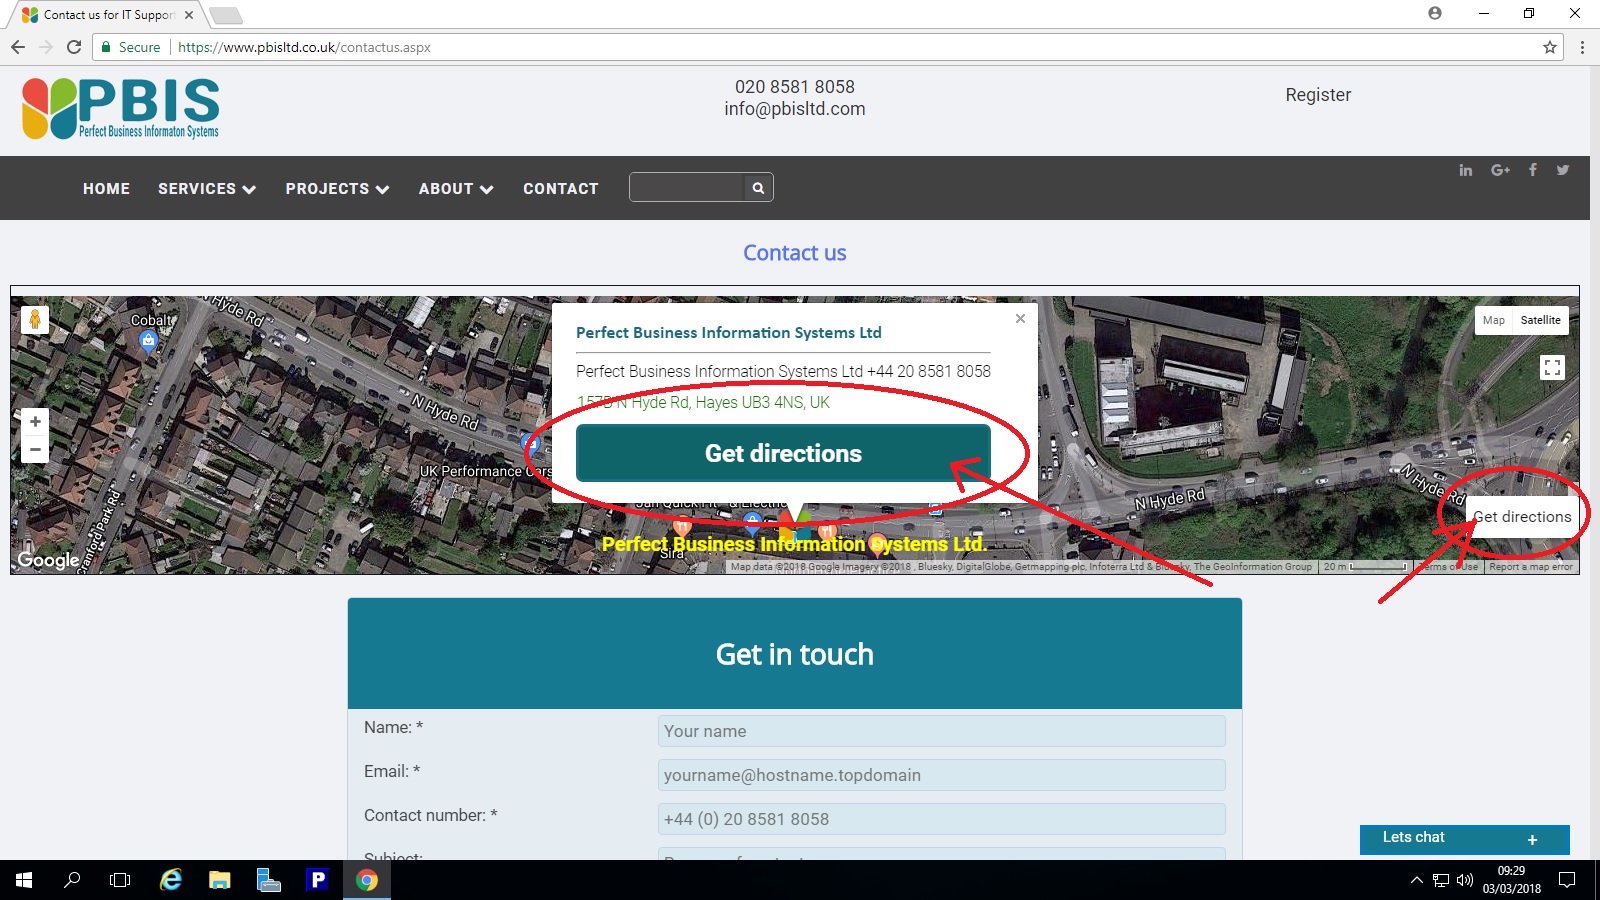 An image showing enhancemants on contact us form for visitor's navigation